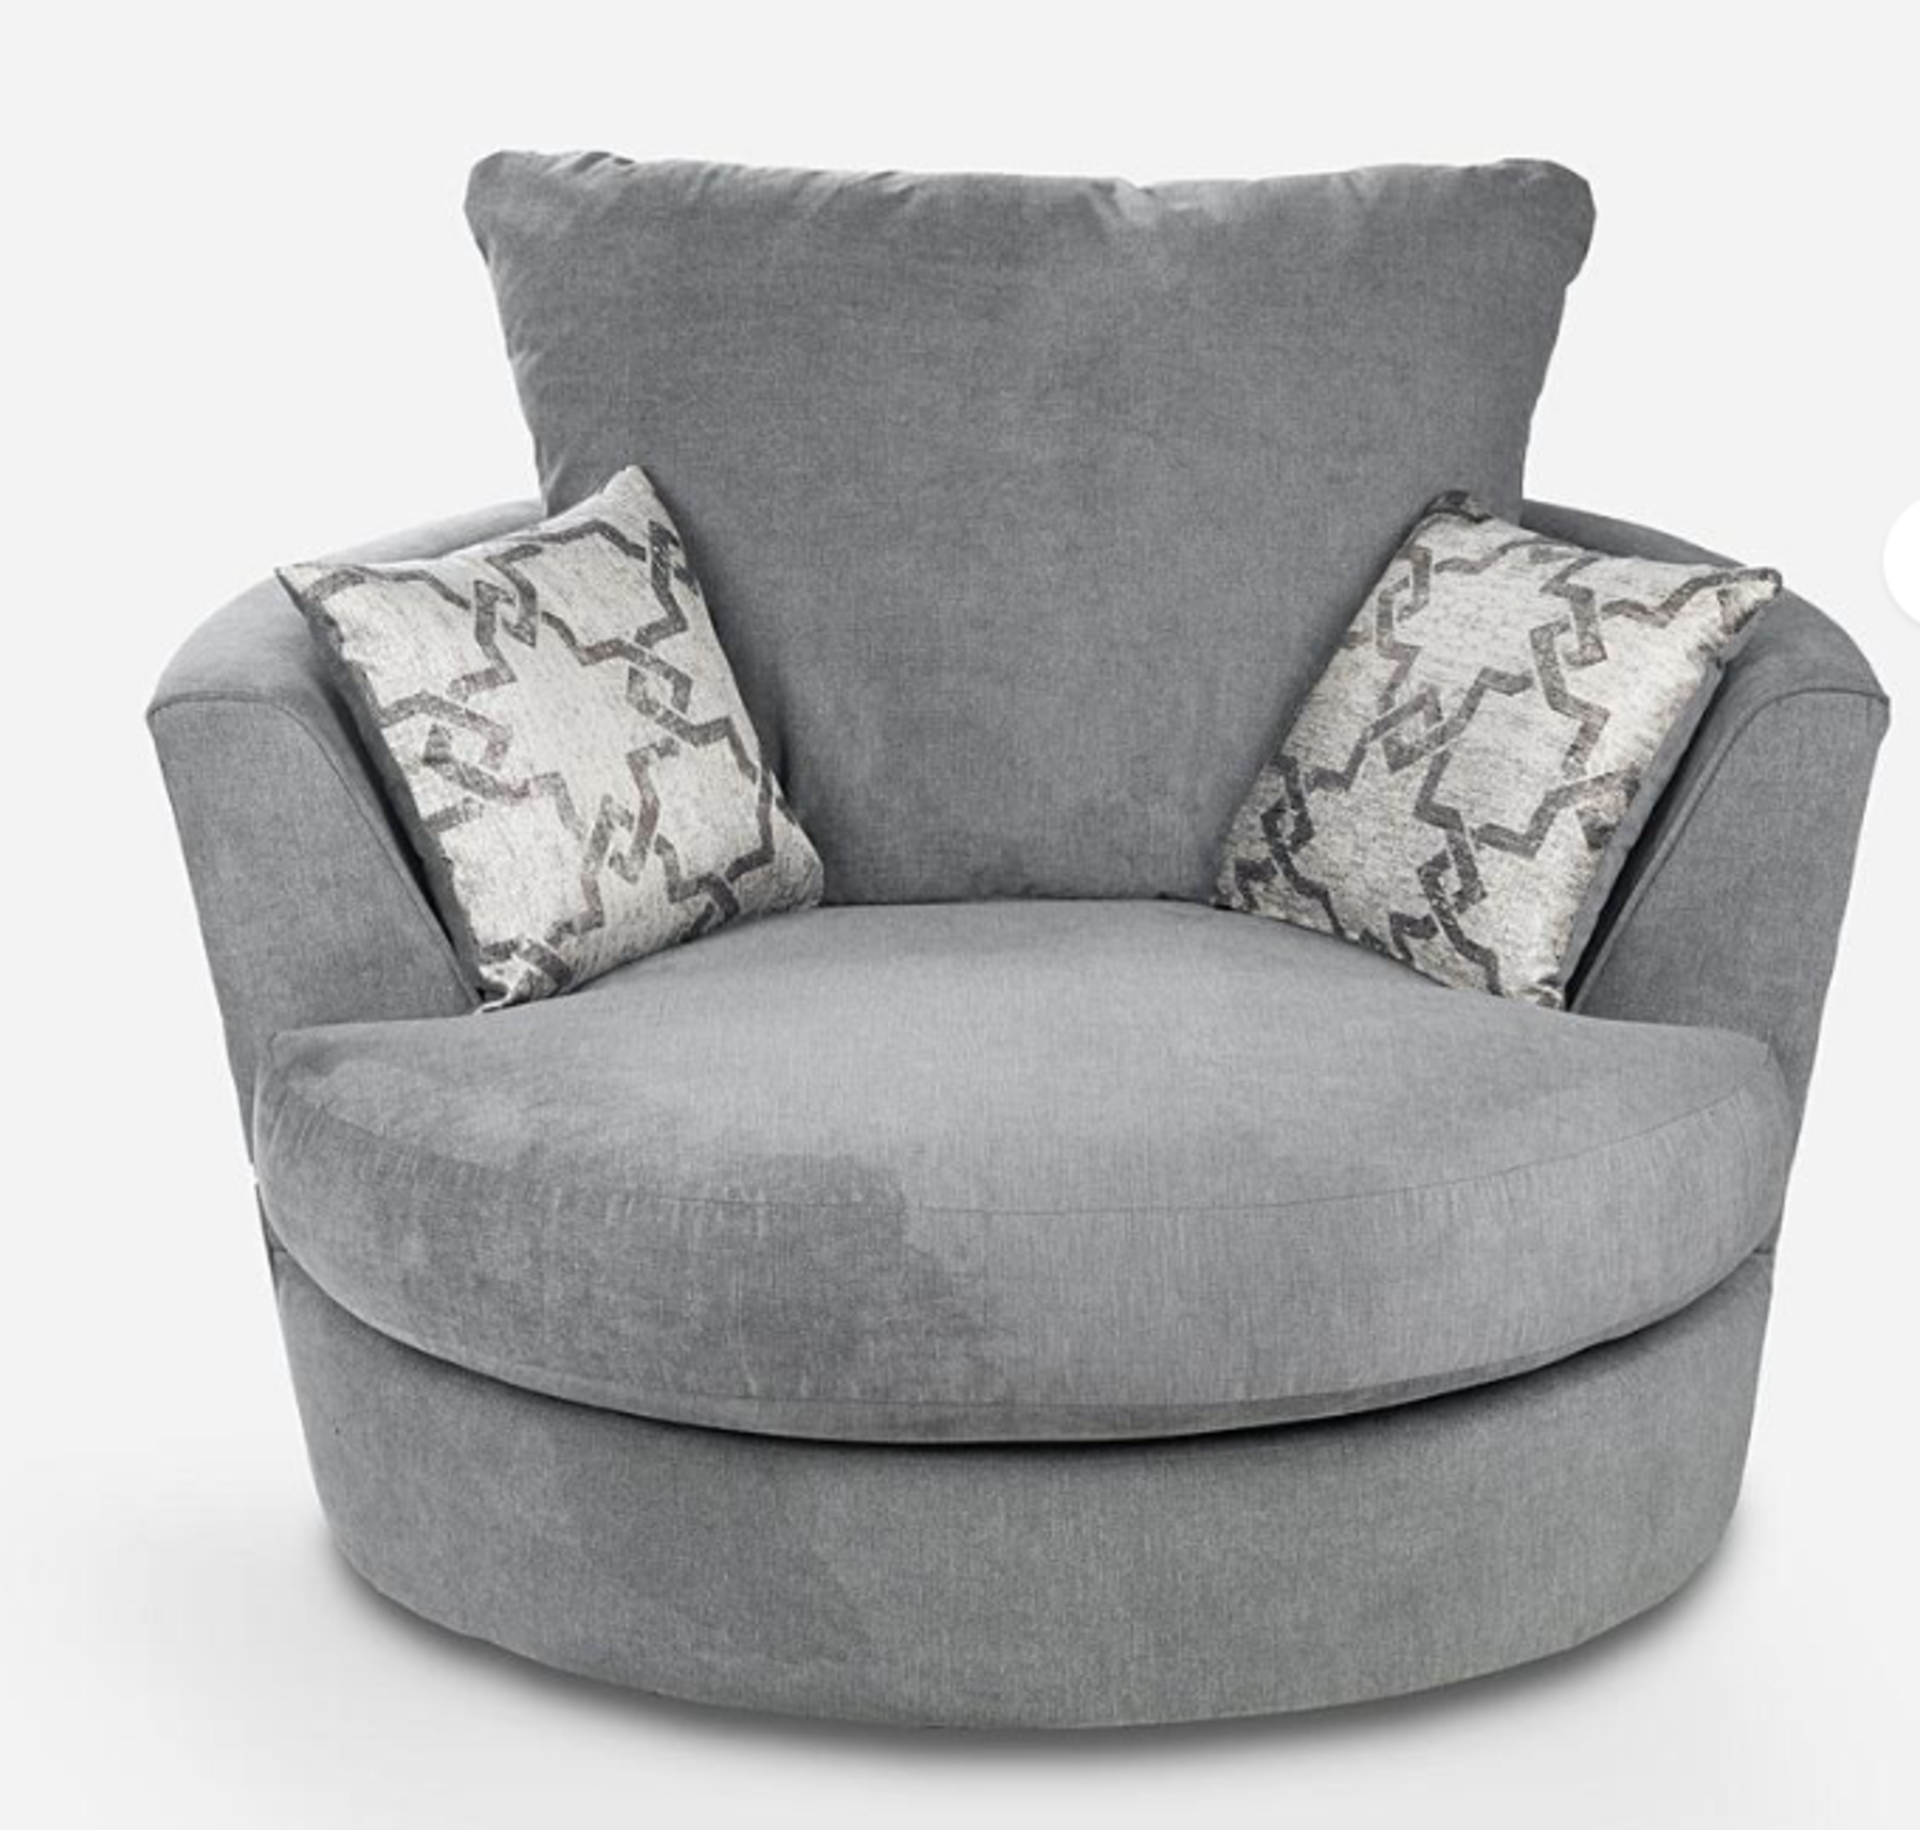 Grace Swivel Chair. - SR. RRP £999.00. This Grace Swivel Chair is perfect for those after a